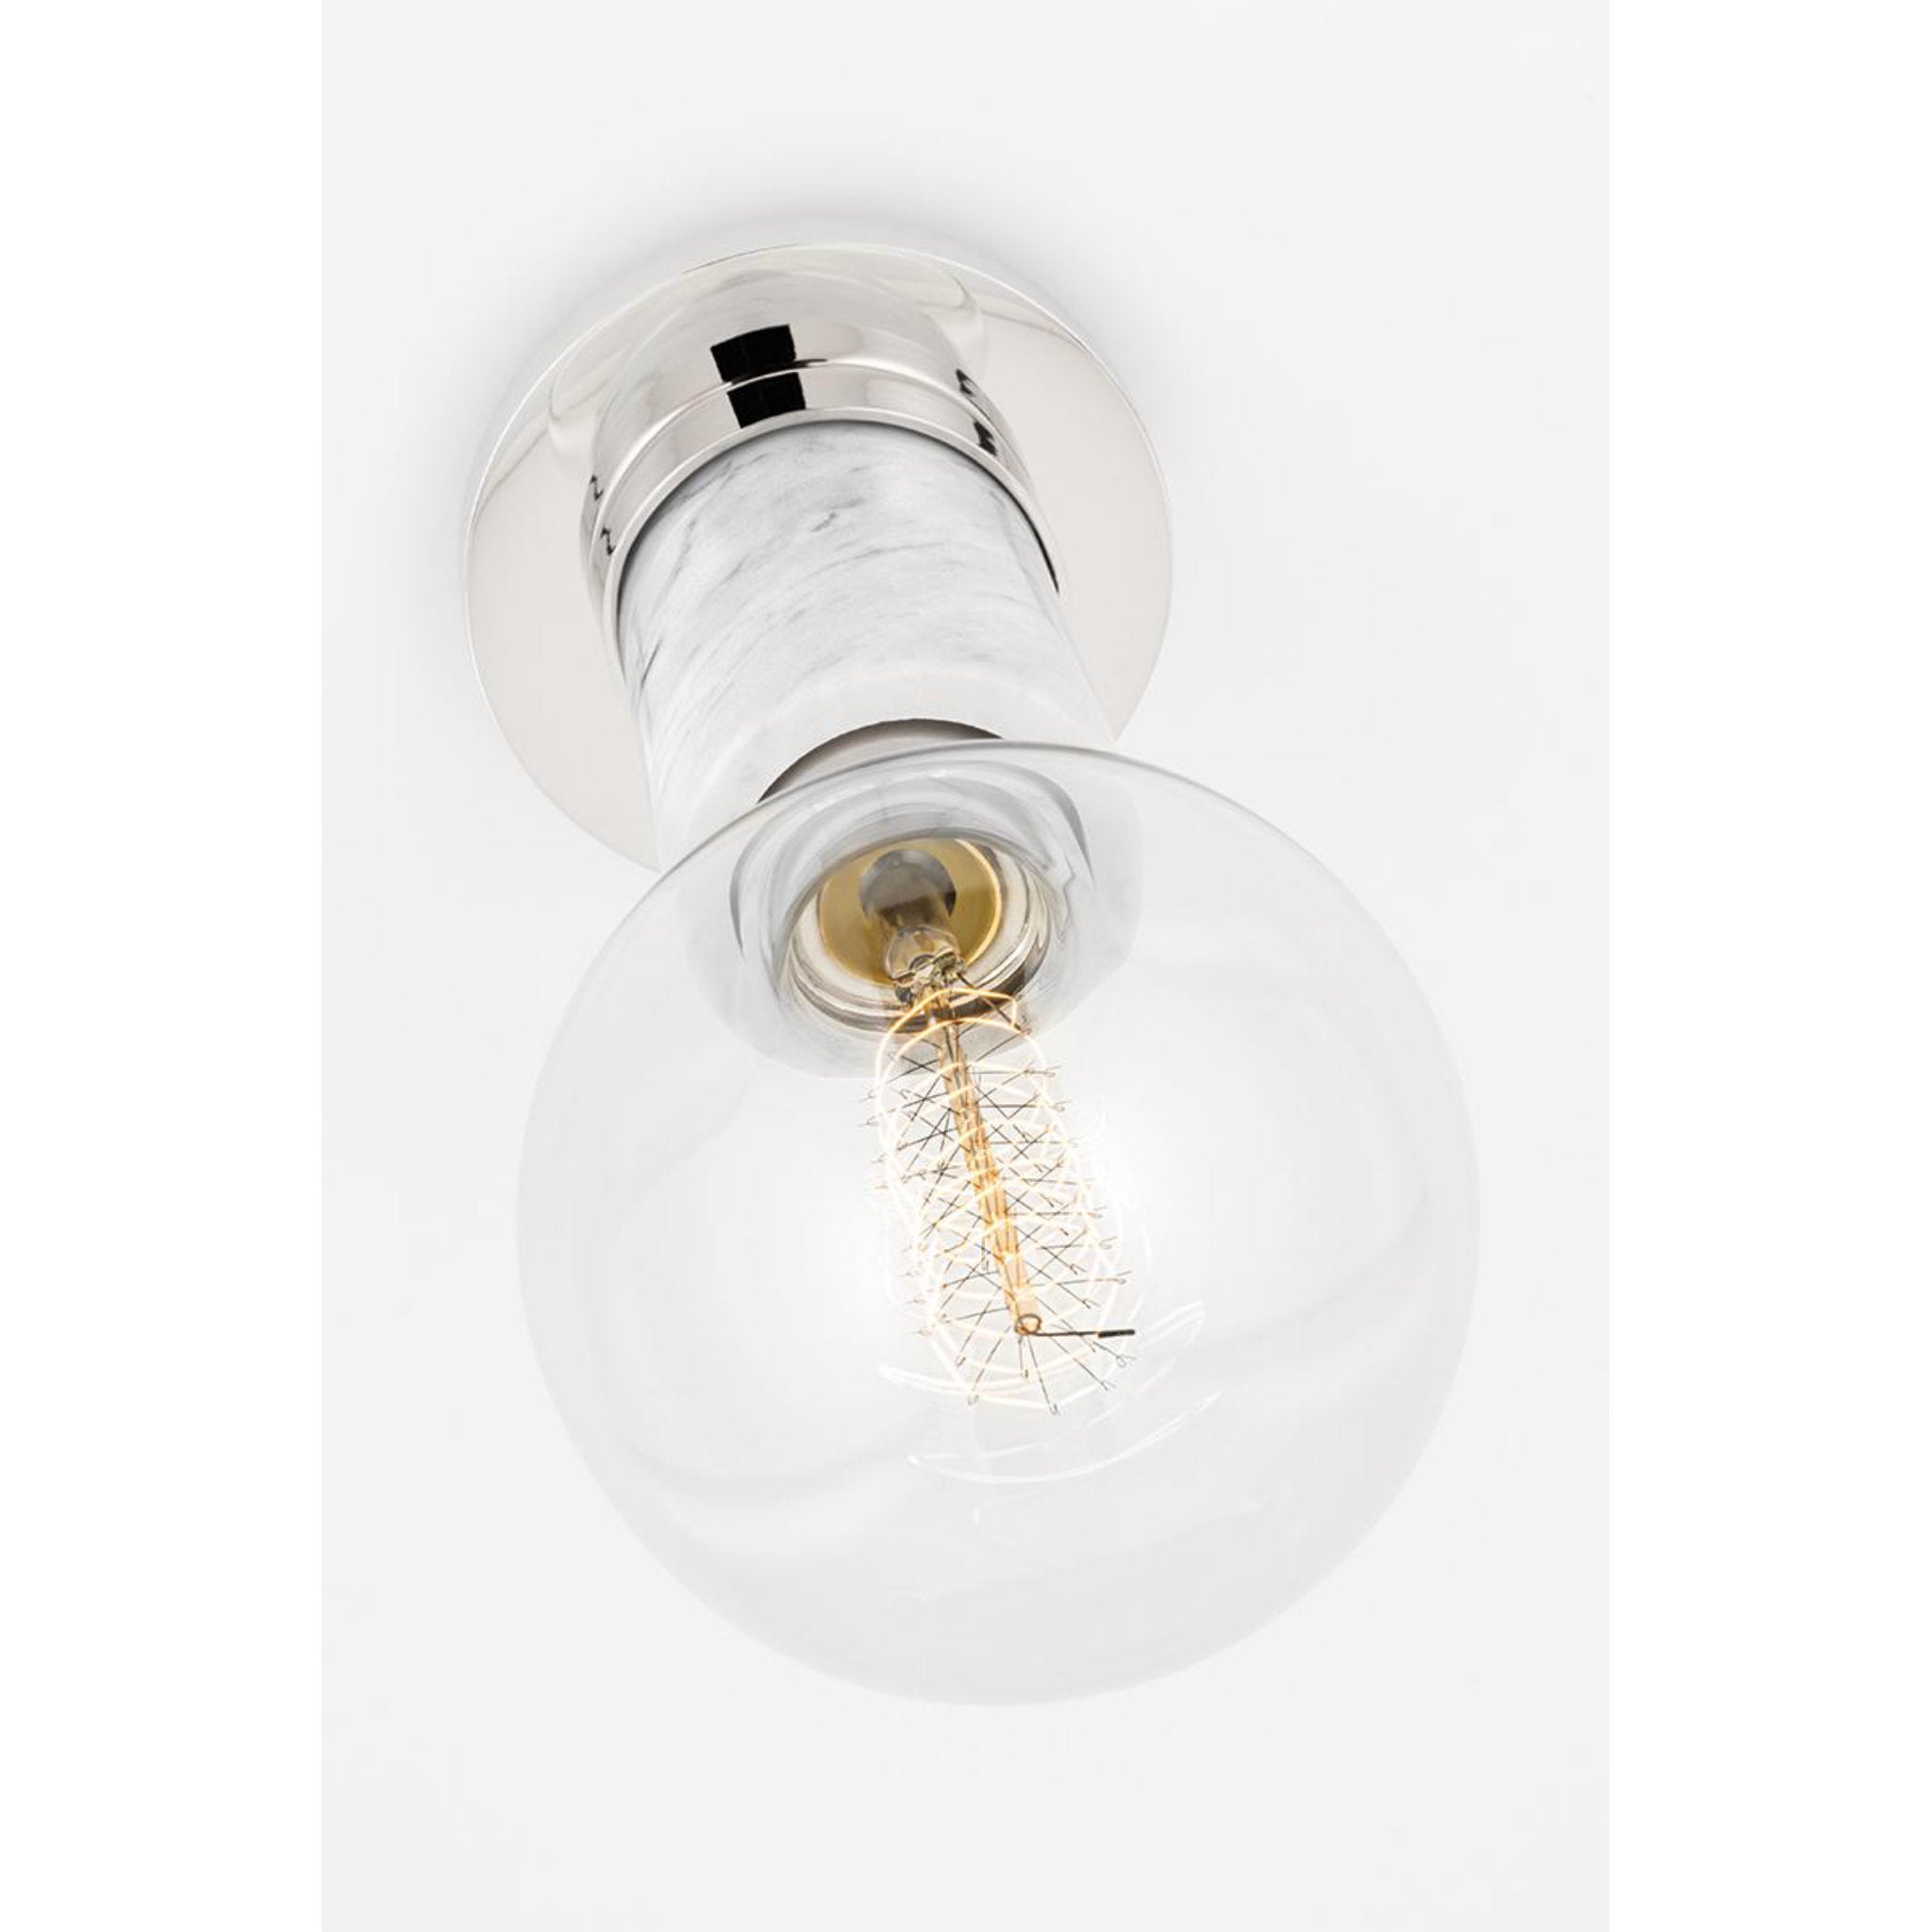 Asime 2-Light Wall Sconce in Polished Nickel